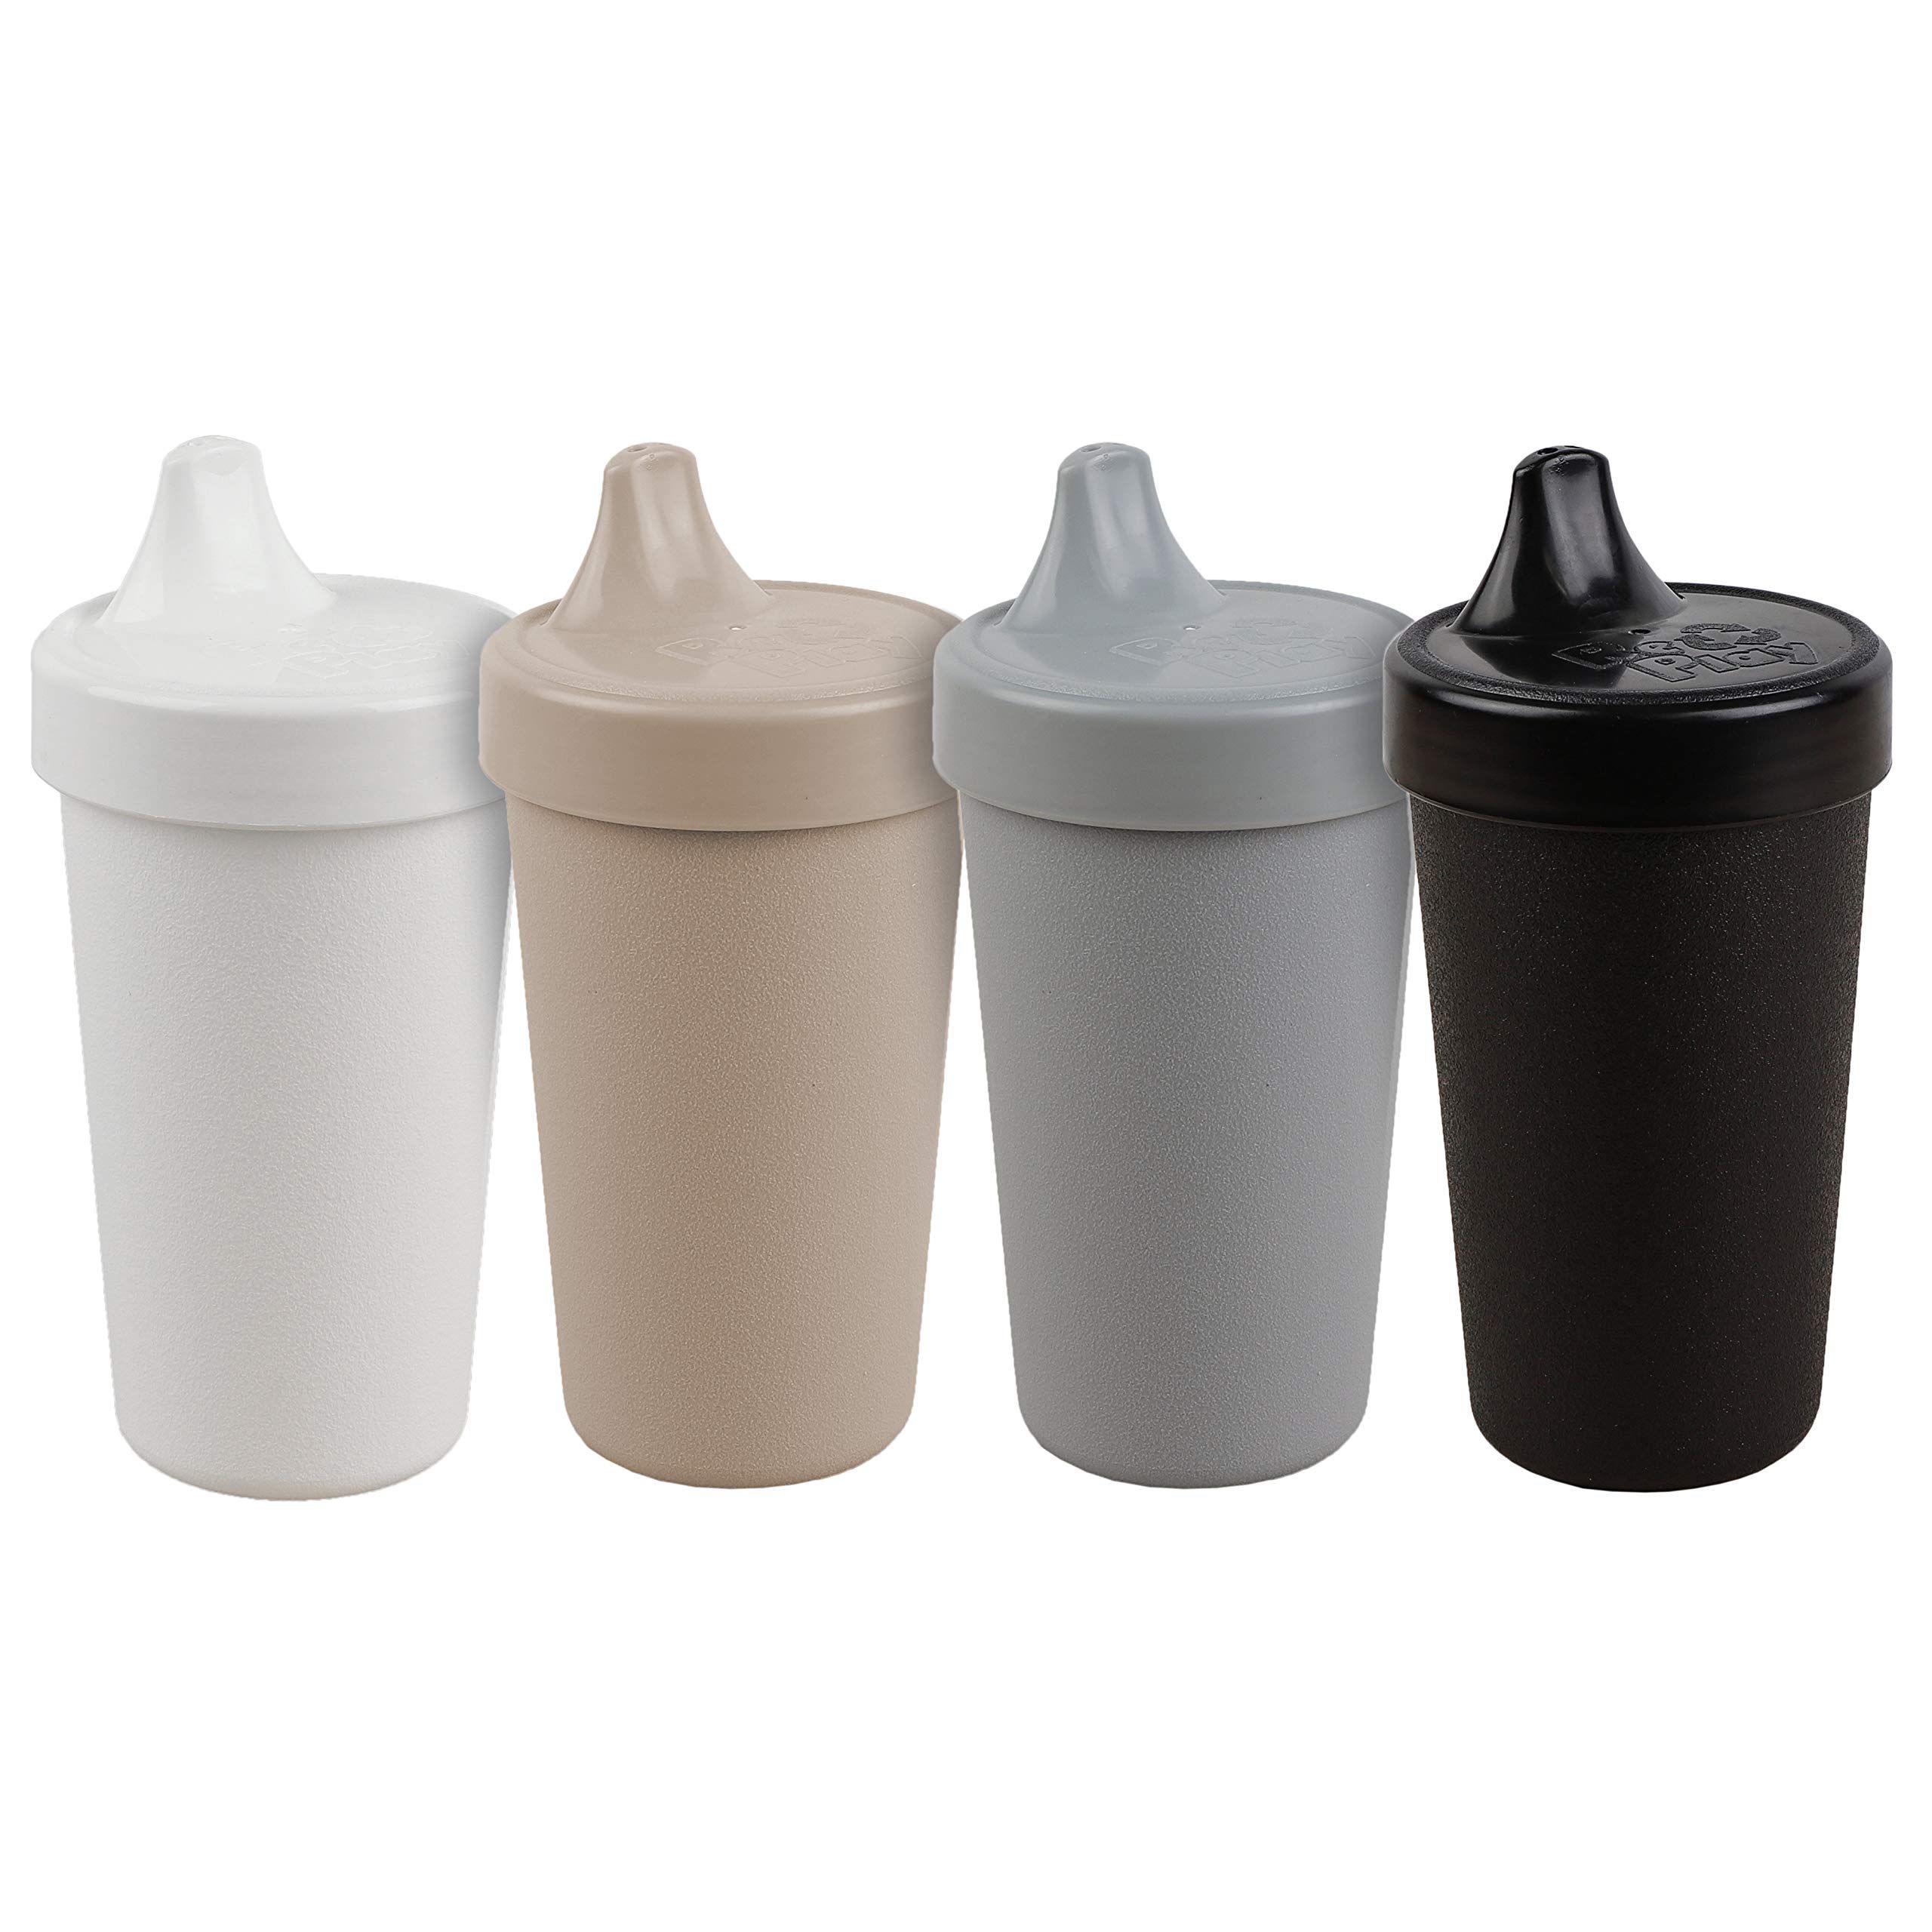 RE-PLAY 4pk - 10 oz. No Spill Sippy Cups for Baby, Toddler, and Child Feeding in White, Grey, Black  | Amazon (US)